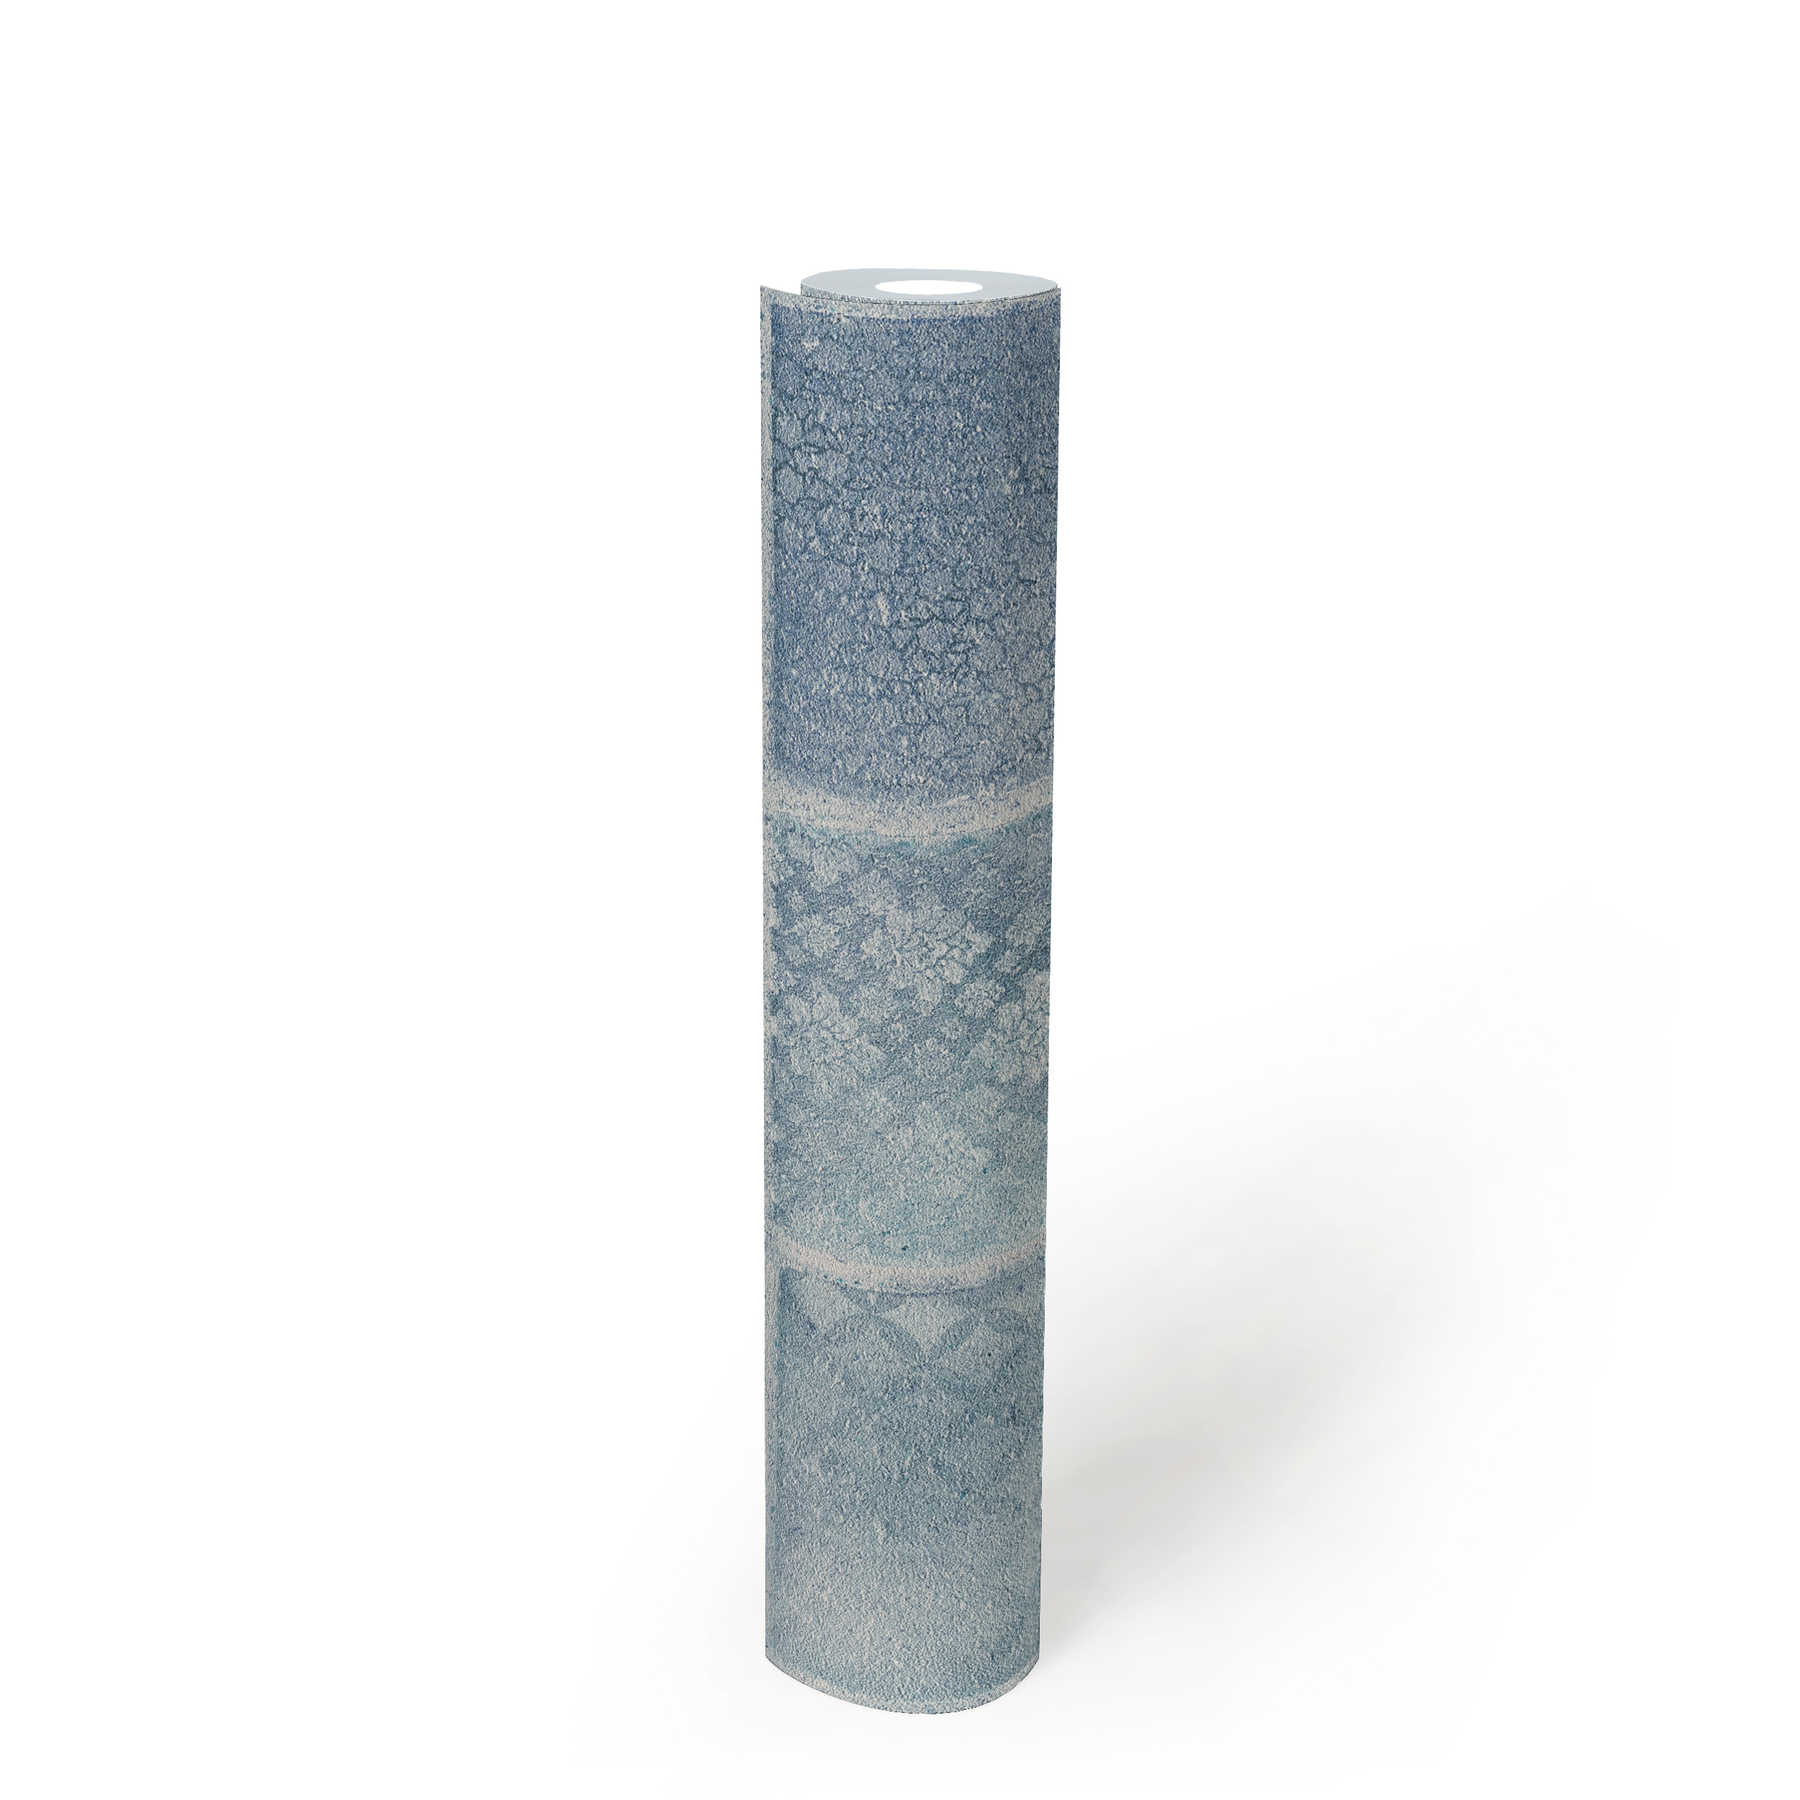             Mosaic and tile look wallpaper - blue, grey, cream
        